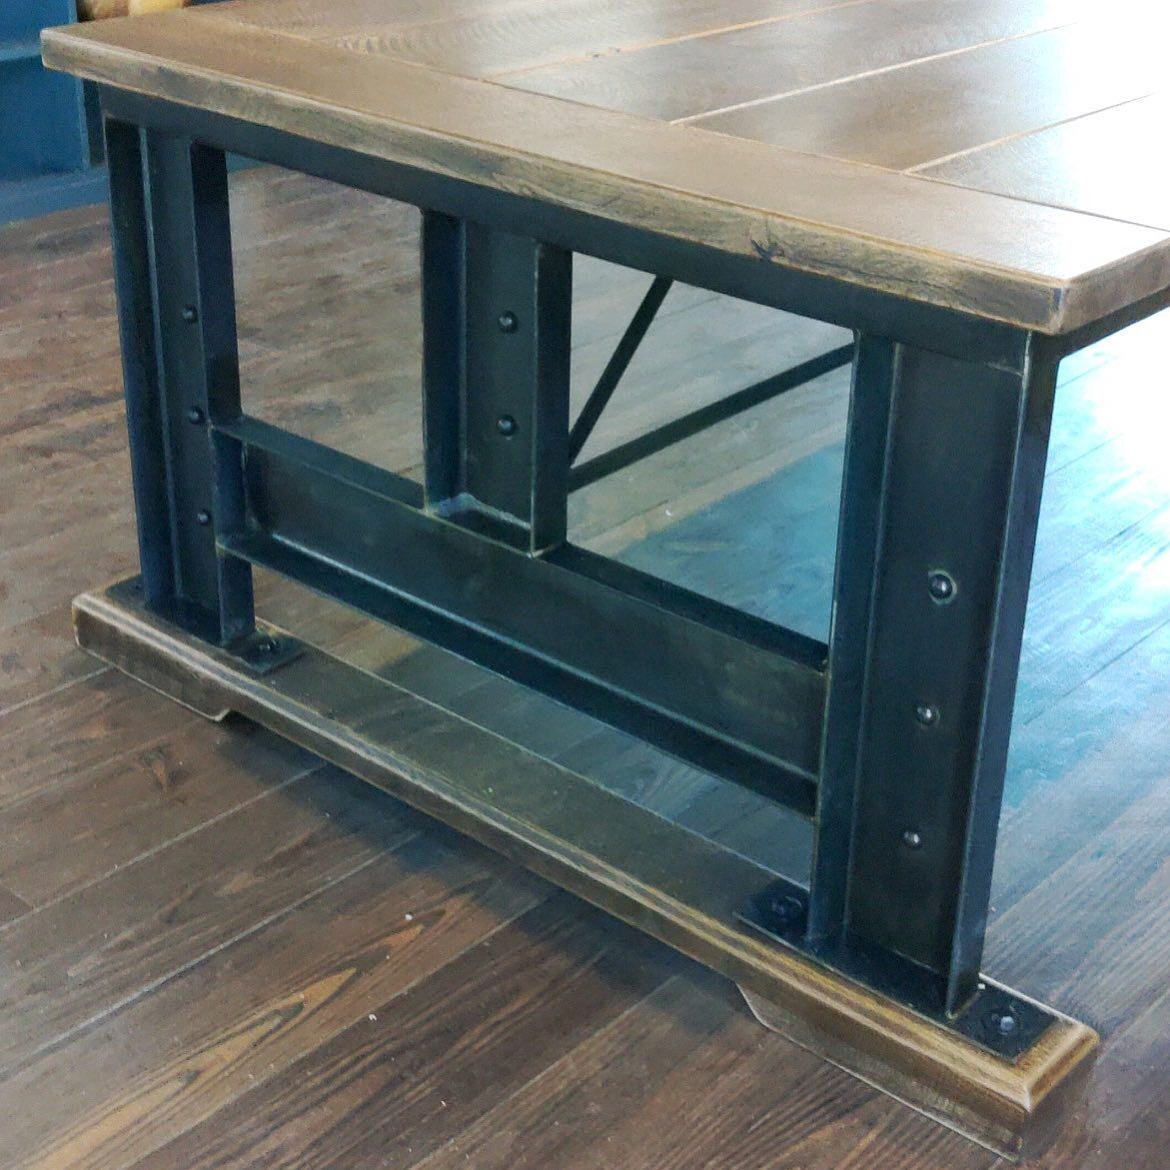 Custom Collaboration // Pirate&rsquo;s Forge and Perrin Woodworking team up yet again to create this custom King&rsquo;s Table. Thanks to the vision of our client and their uber talented designer. The inspiration was to create an industrial, rustic, 